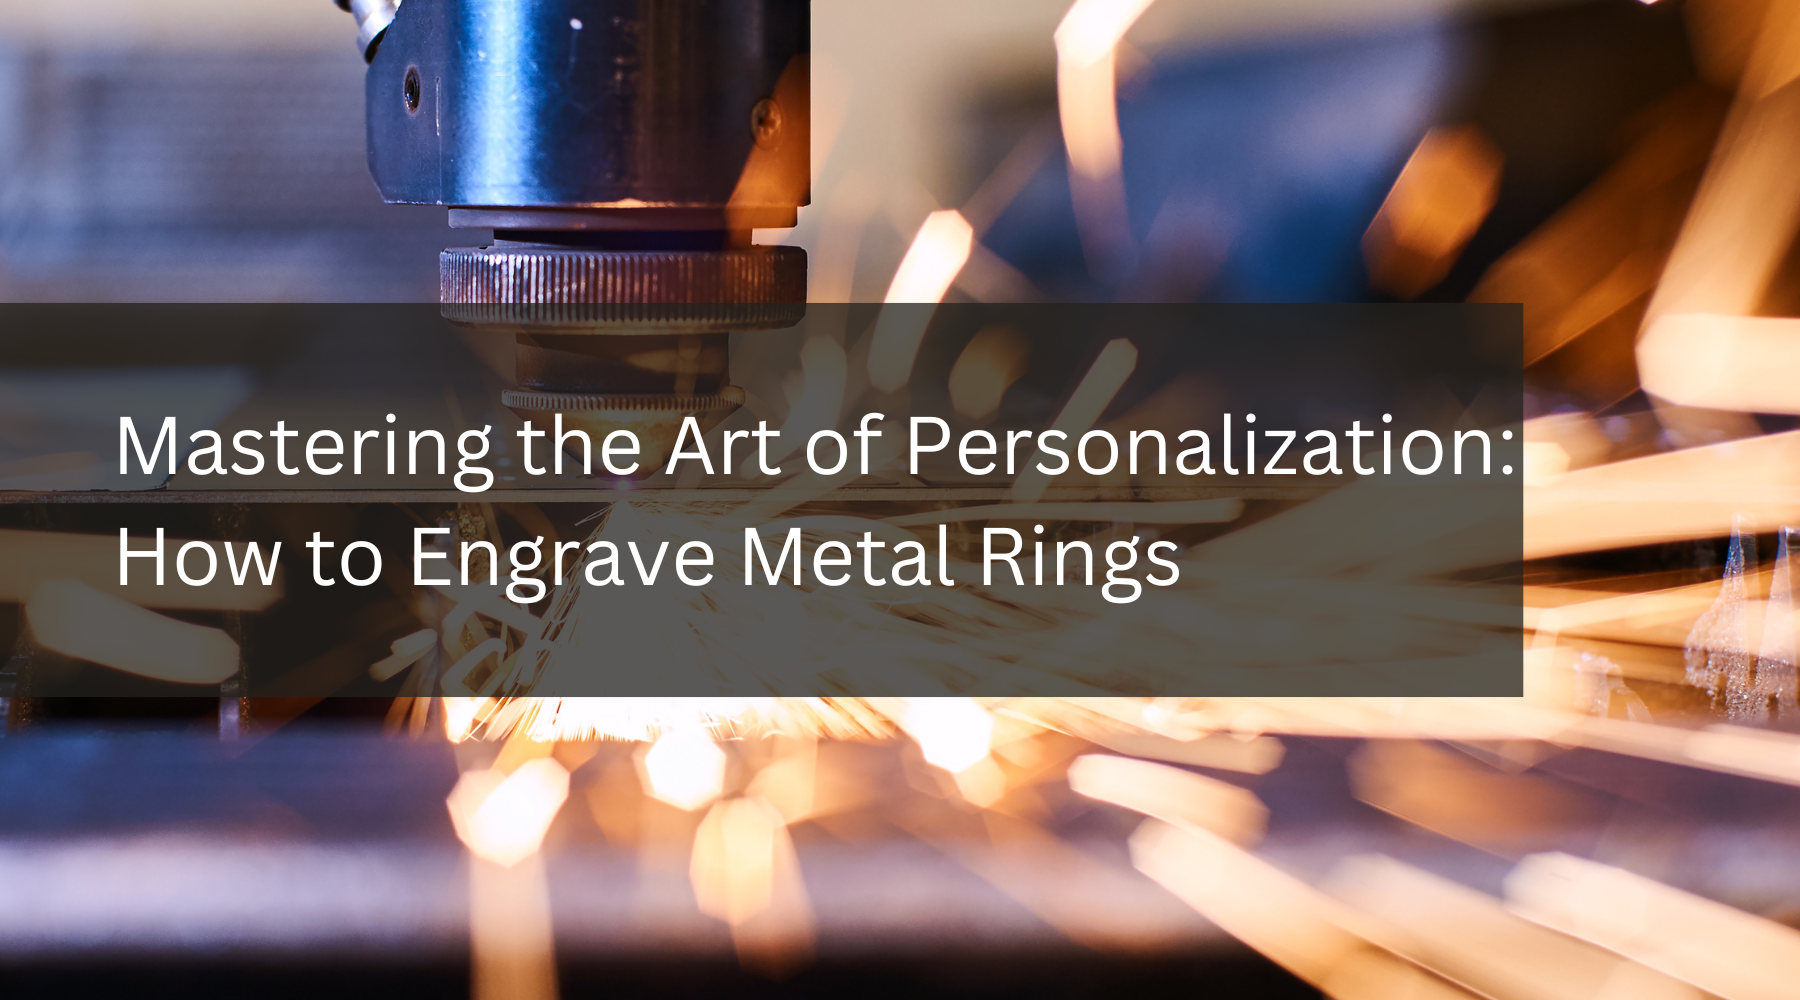 Mastering the Art of Personalization: How to Engrave Metal Rings